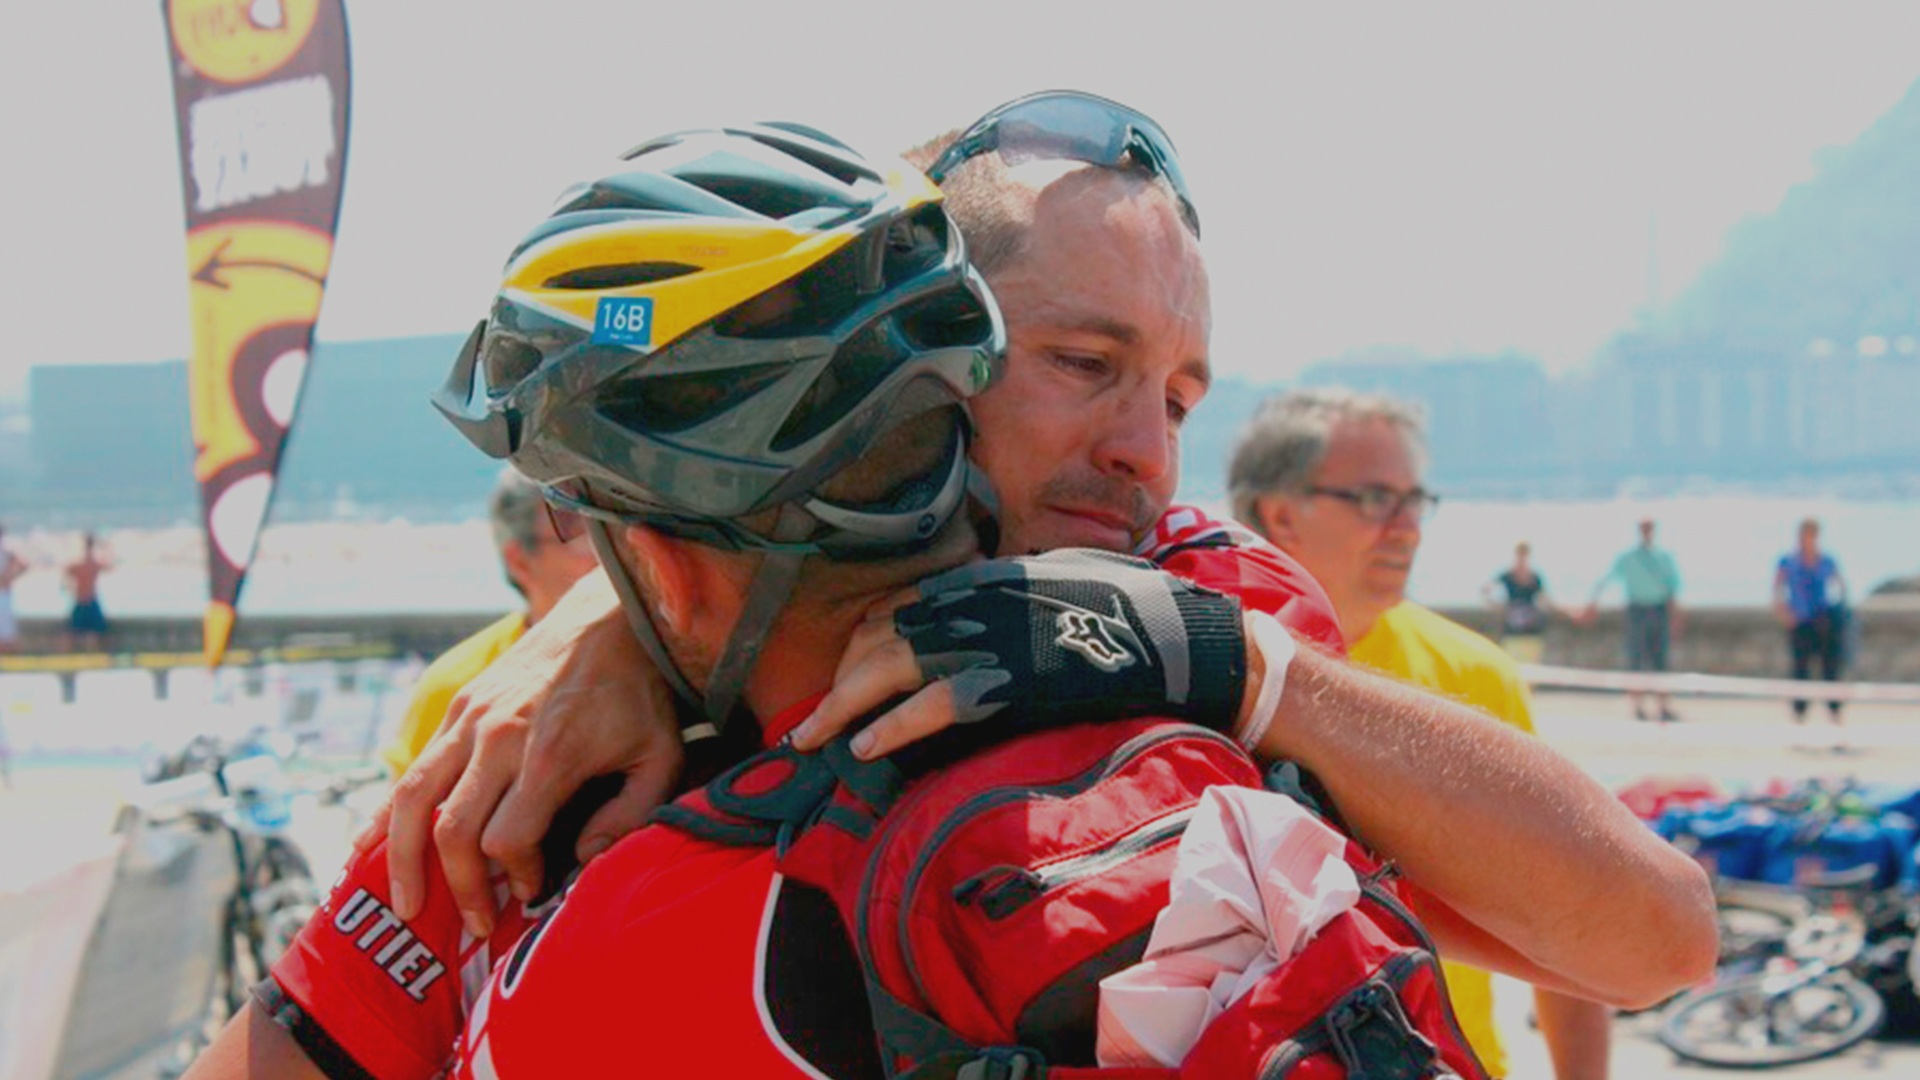 Mutual help and camaraderie besides the competition in Transpyr